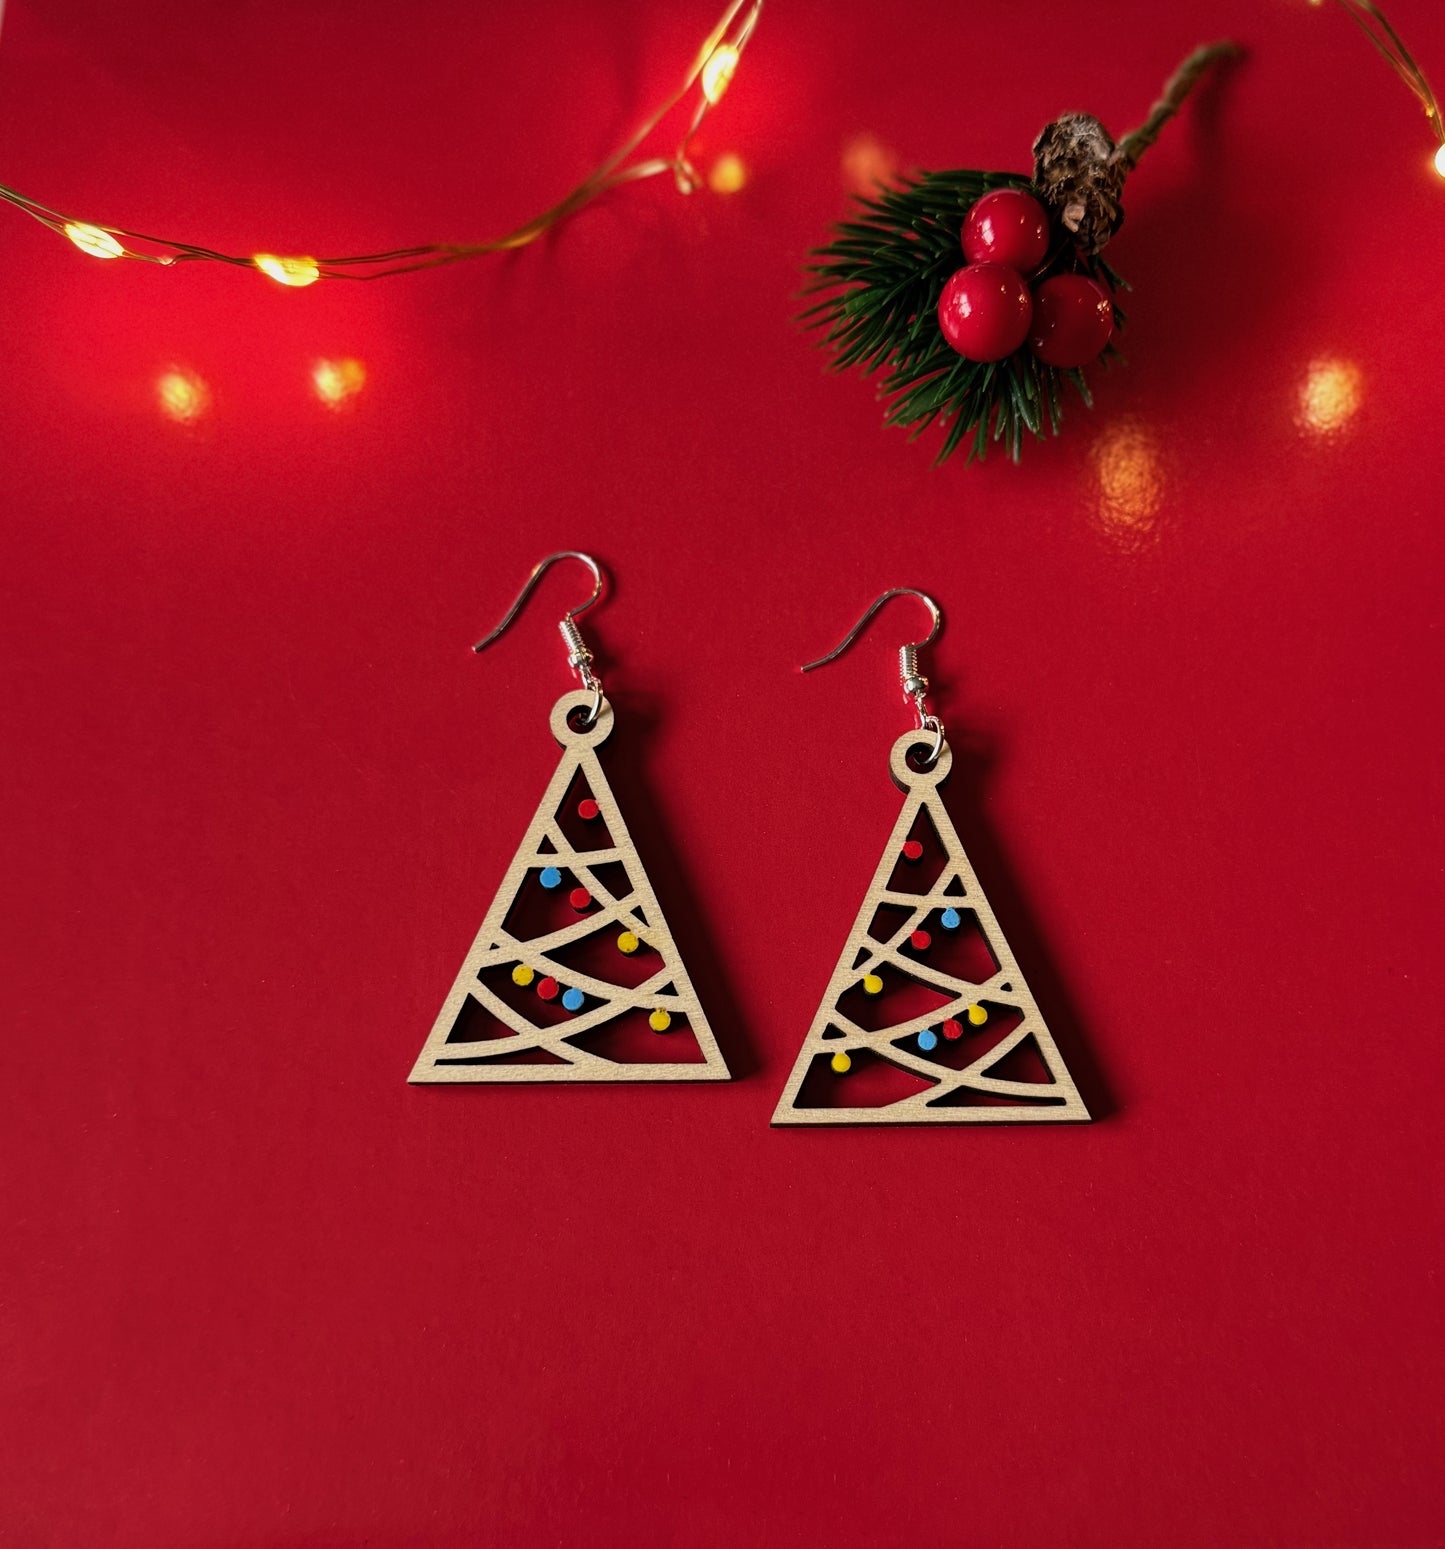 Laser engraved Minimalist Christmas tree earrings with festive lights, holiday earrings